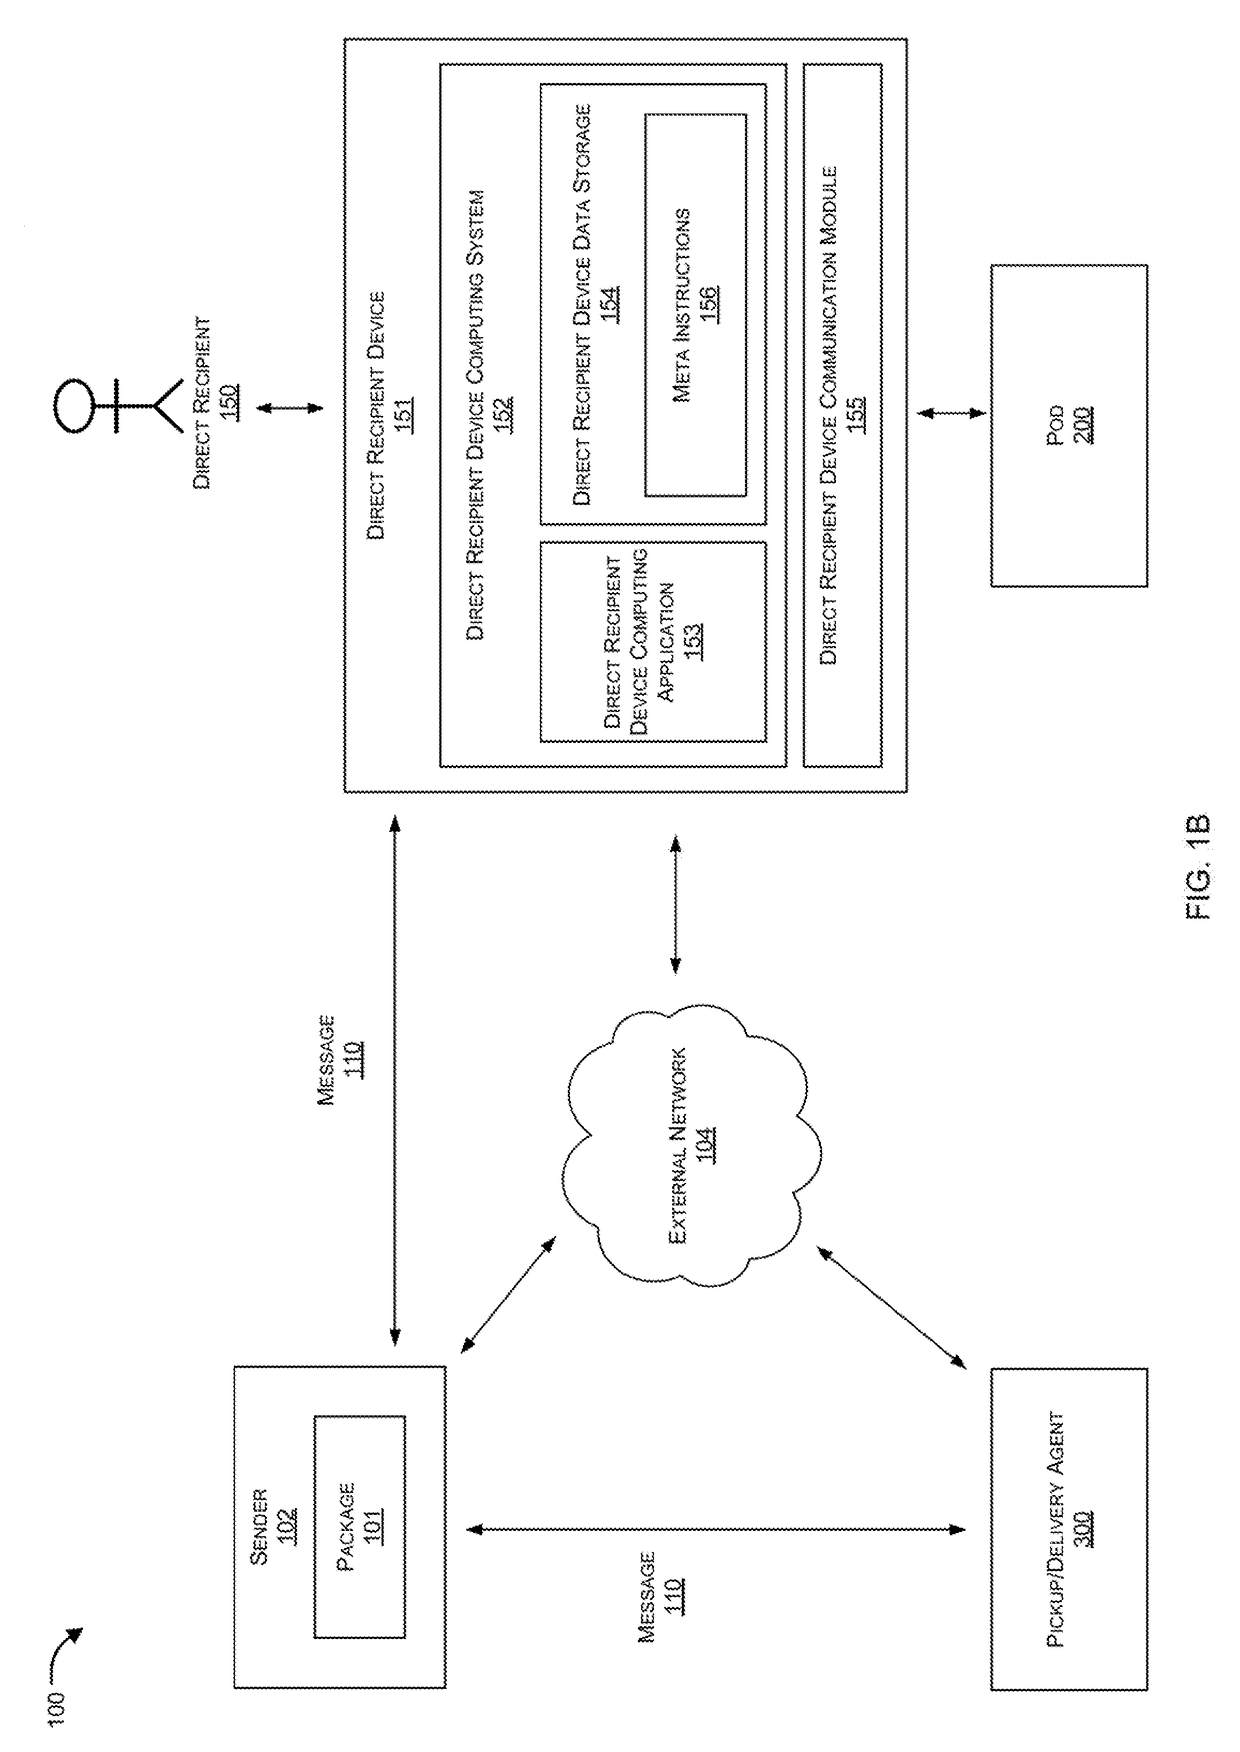 System and method to enable delivery and pick up of packages using pods and unmanned vehicles